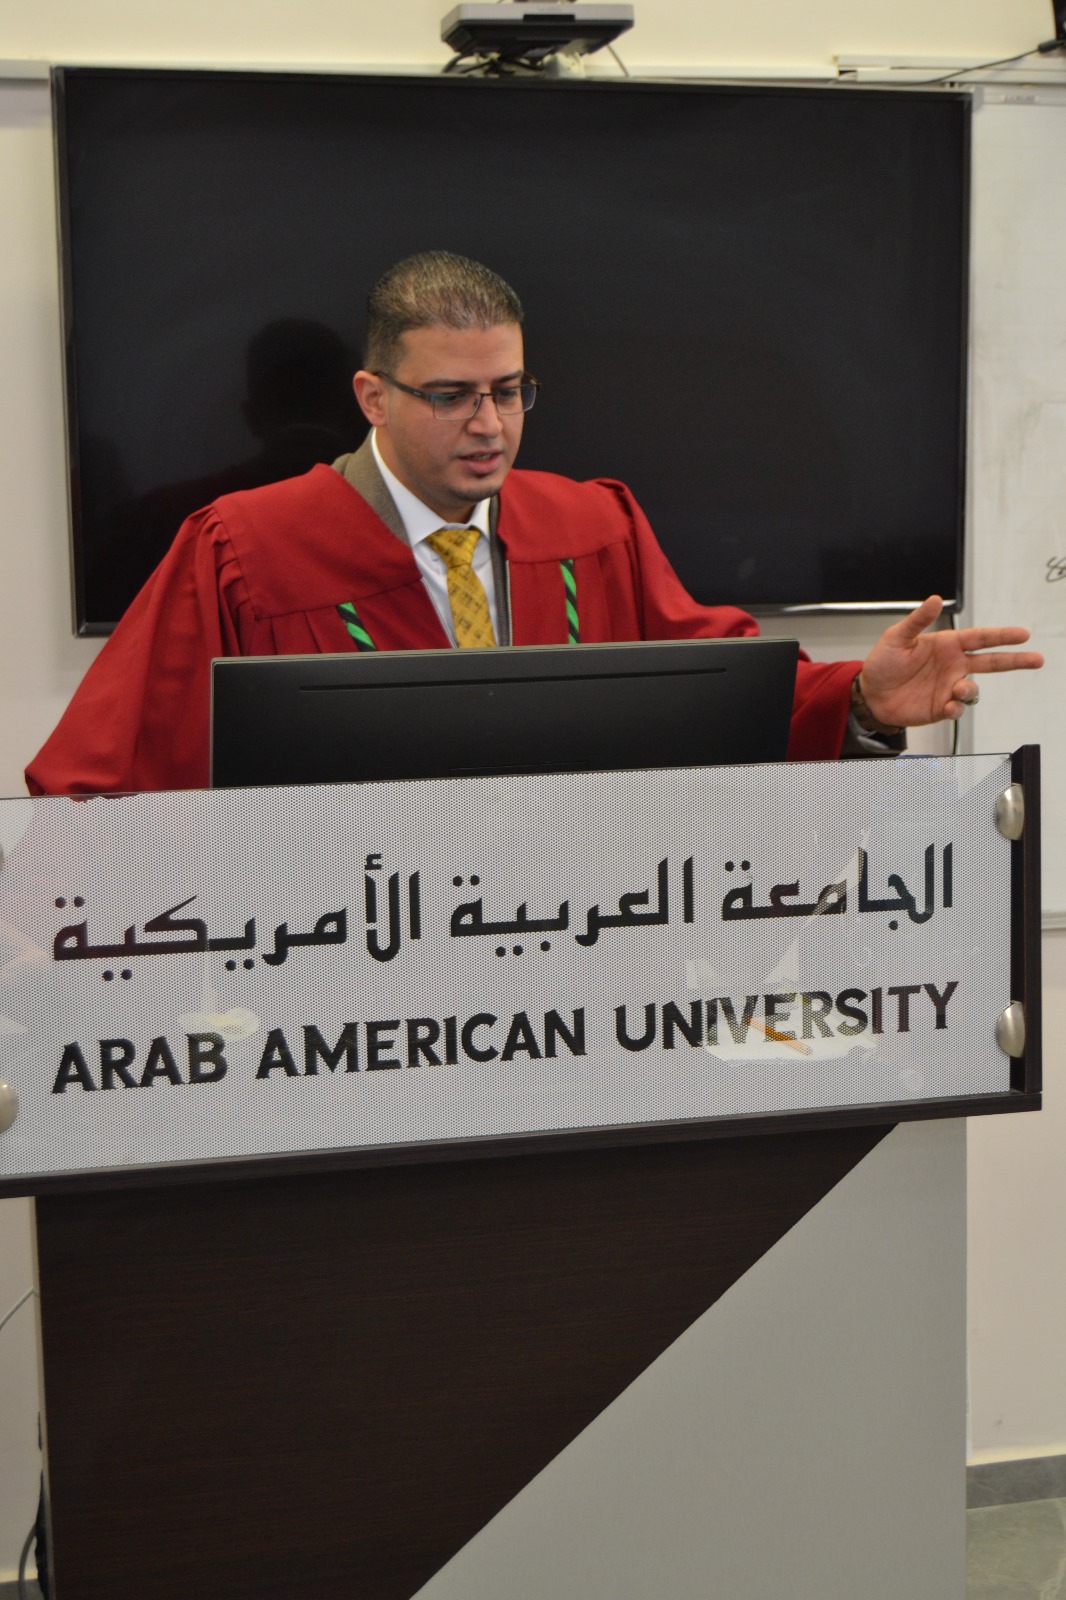 Defense of a Master’s Thesis in the Cyber Security Program by “Al Sharif Hassan” Abu Rbian